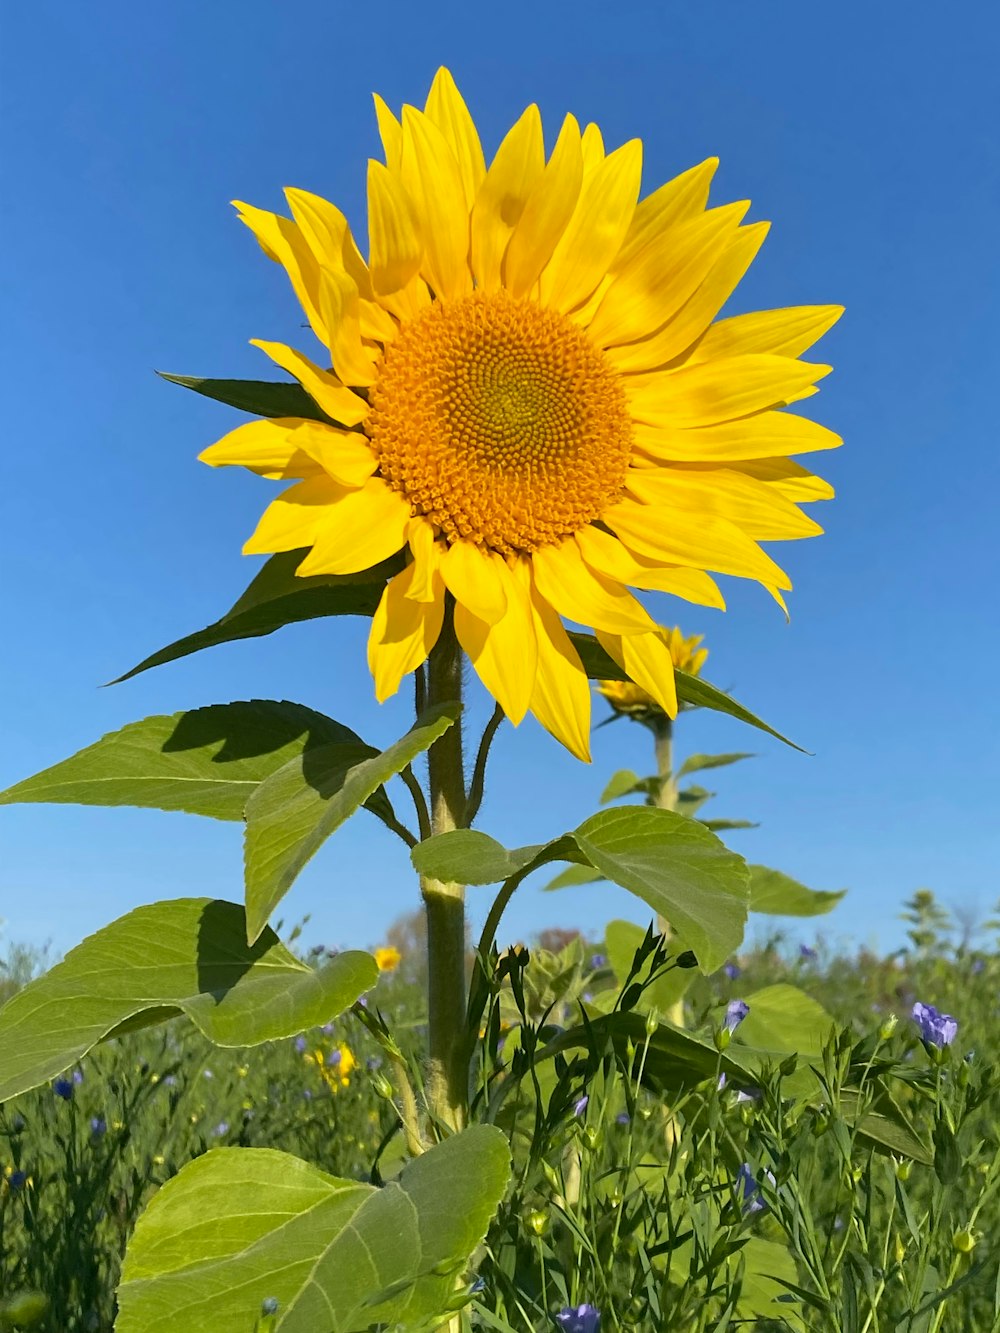 a large sunflower in a field with blue sky in the background